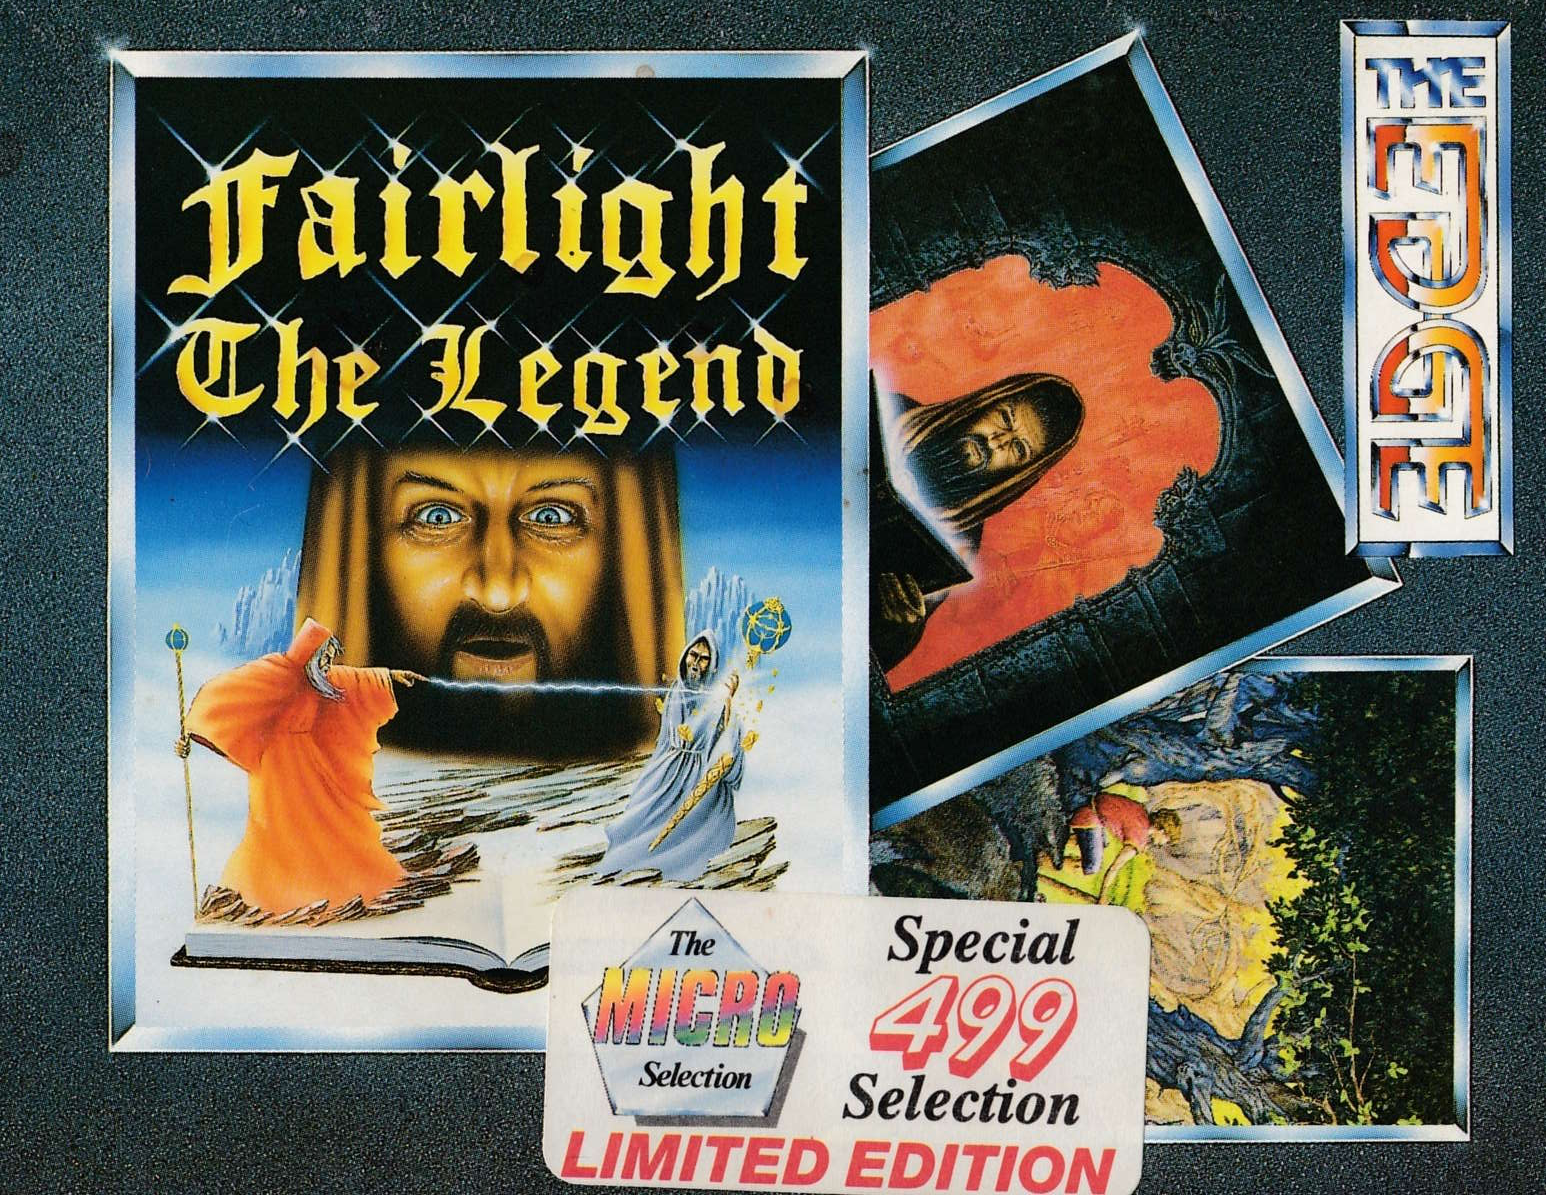 cover of the Amstrad CPC game Fairlight - The Legend  by GameBase CPC